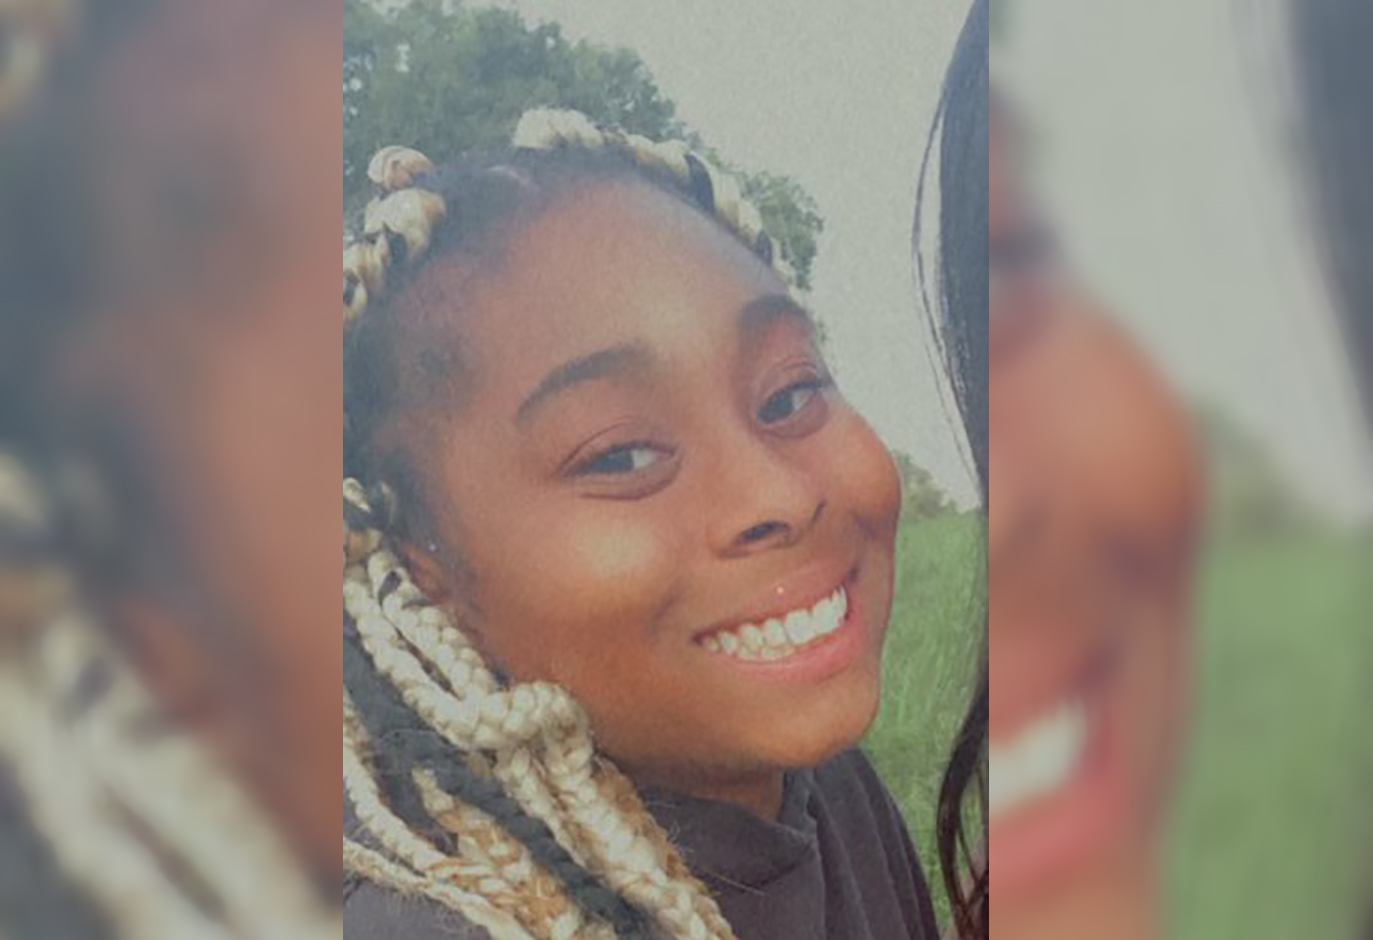 Girl, 15, Killed In Columbia Heights Shooting; Investigation Underway